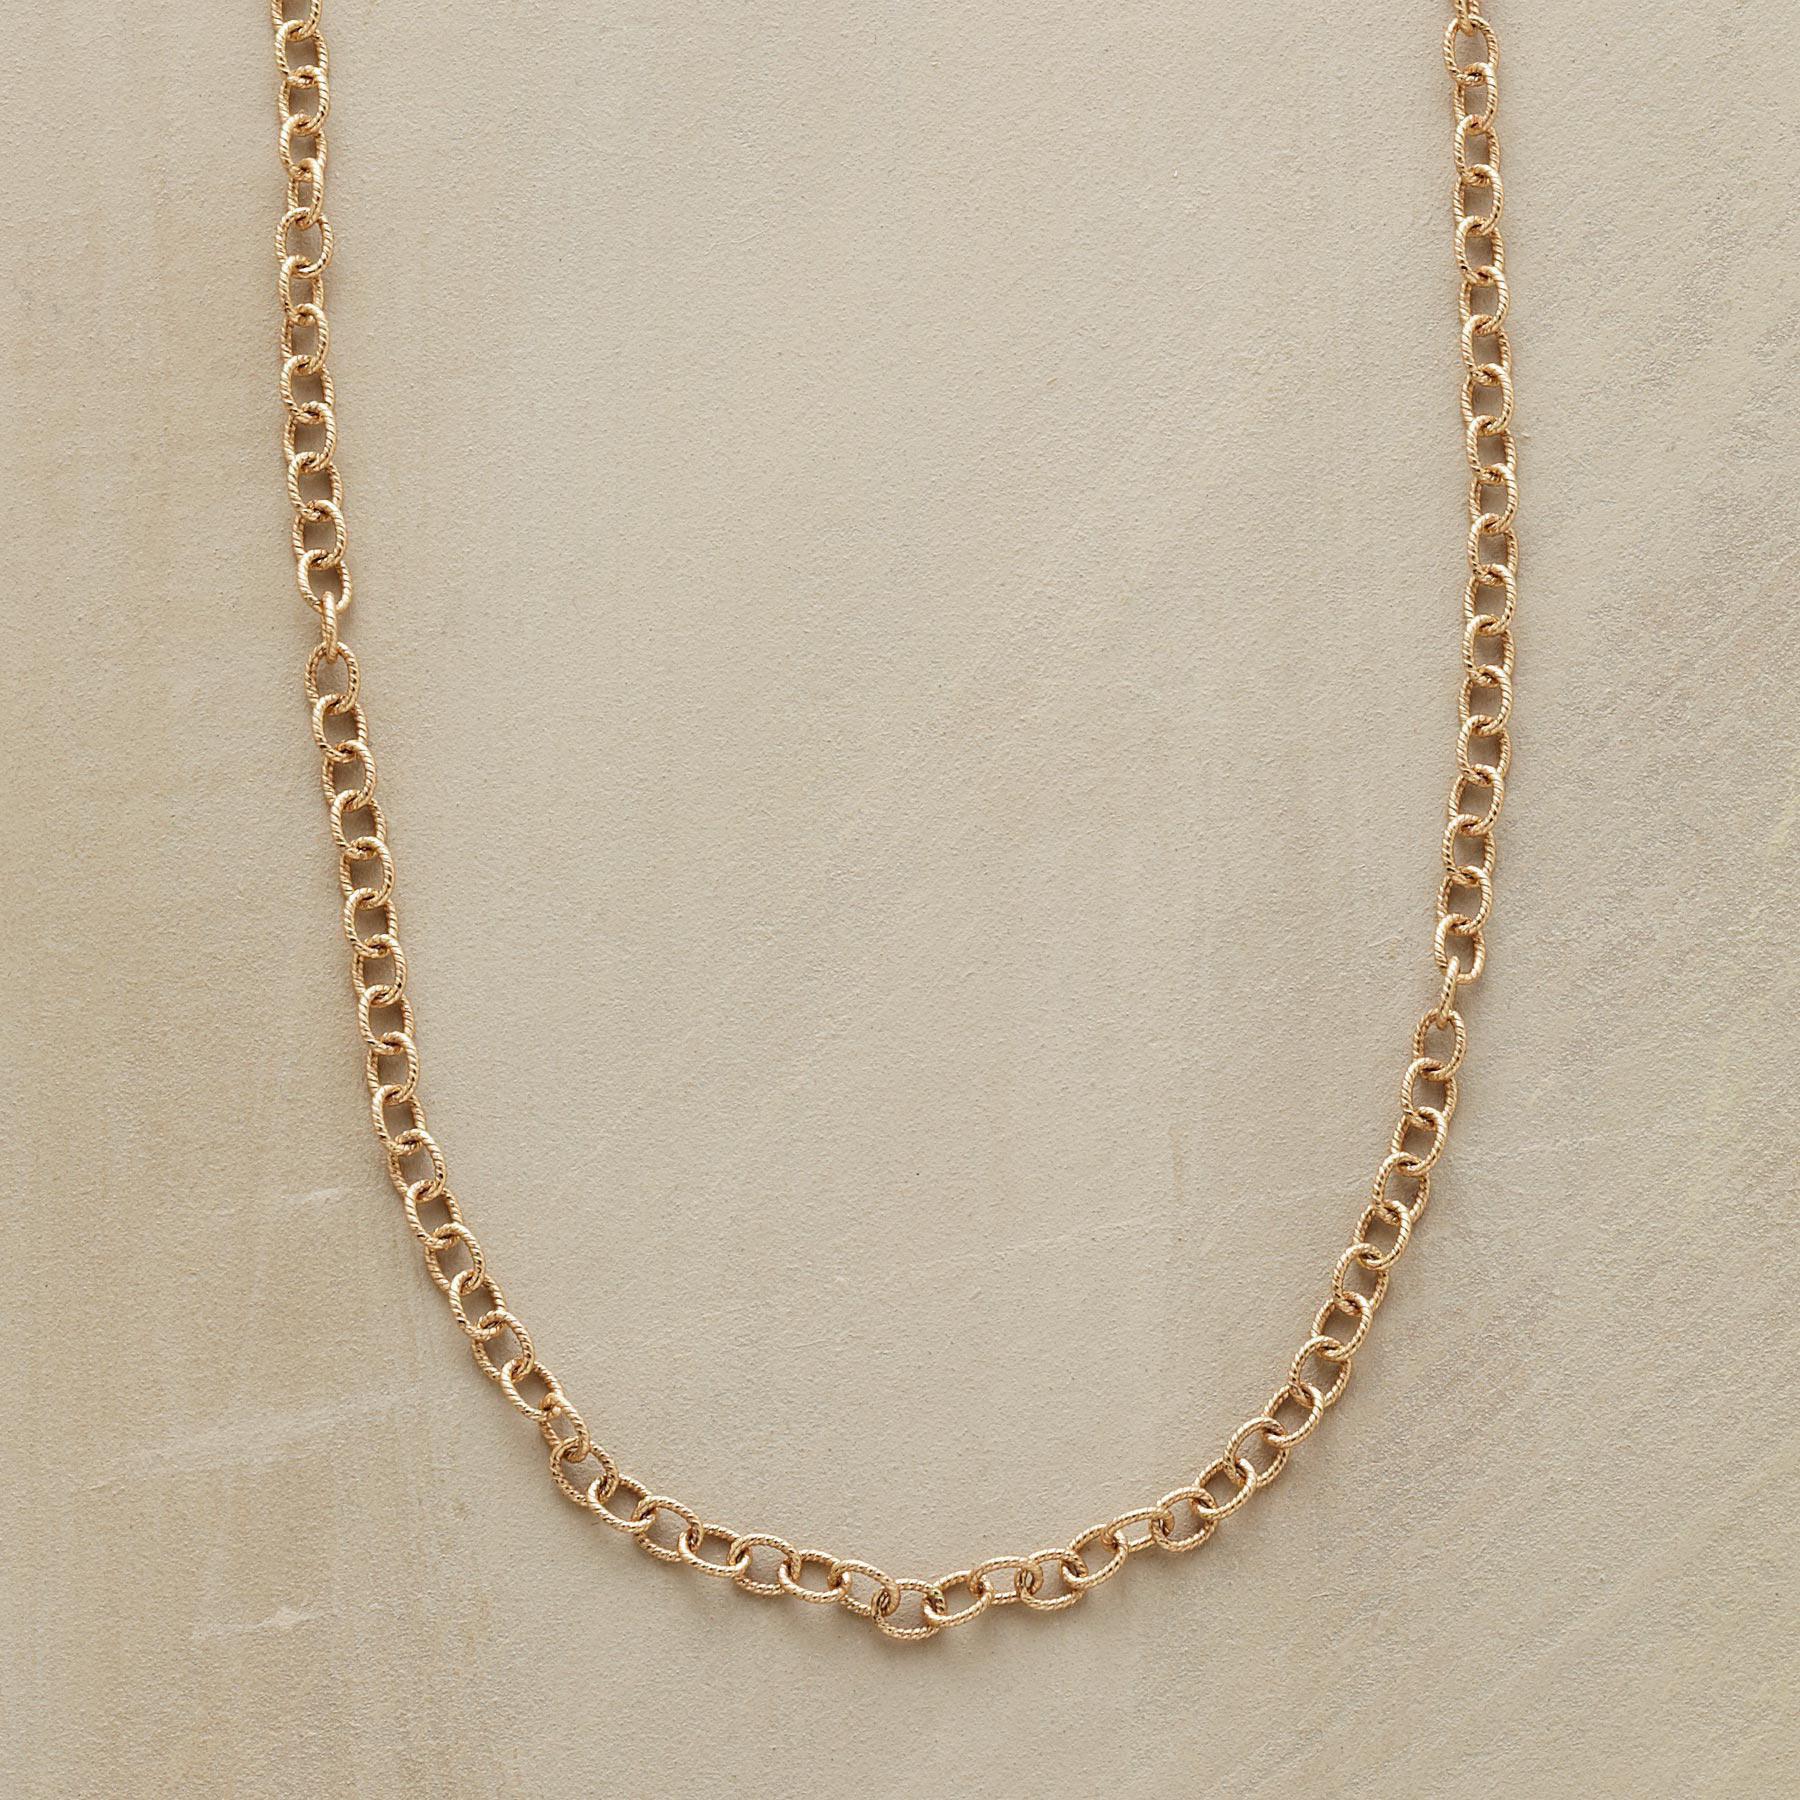 Gold Chain Charmstarter Necklace